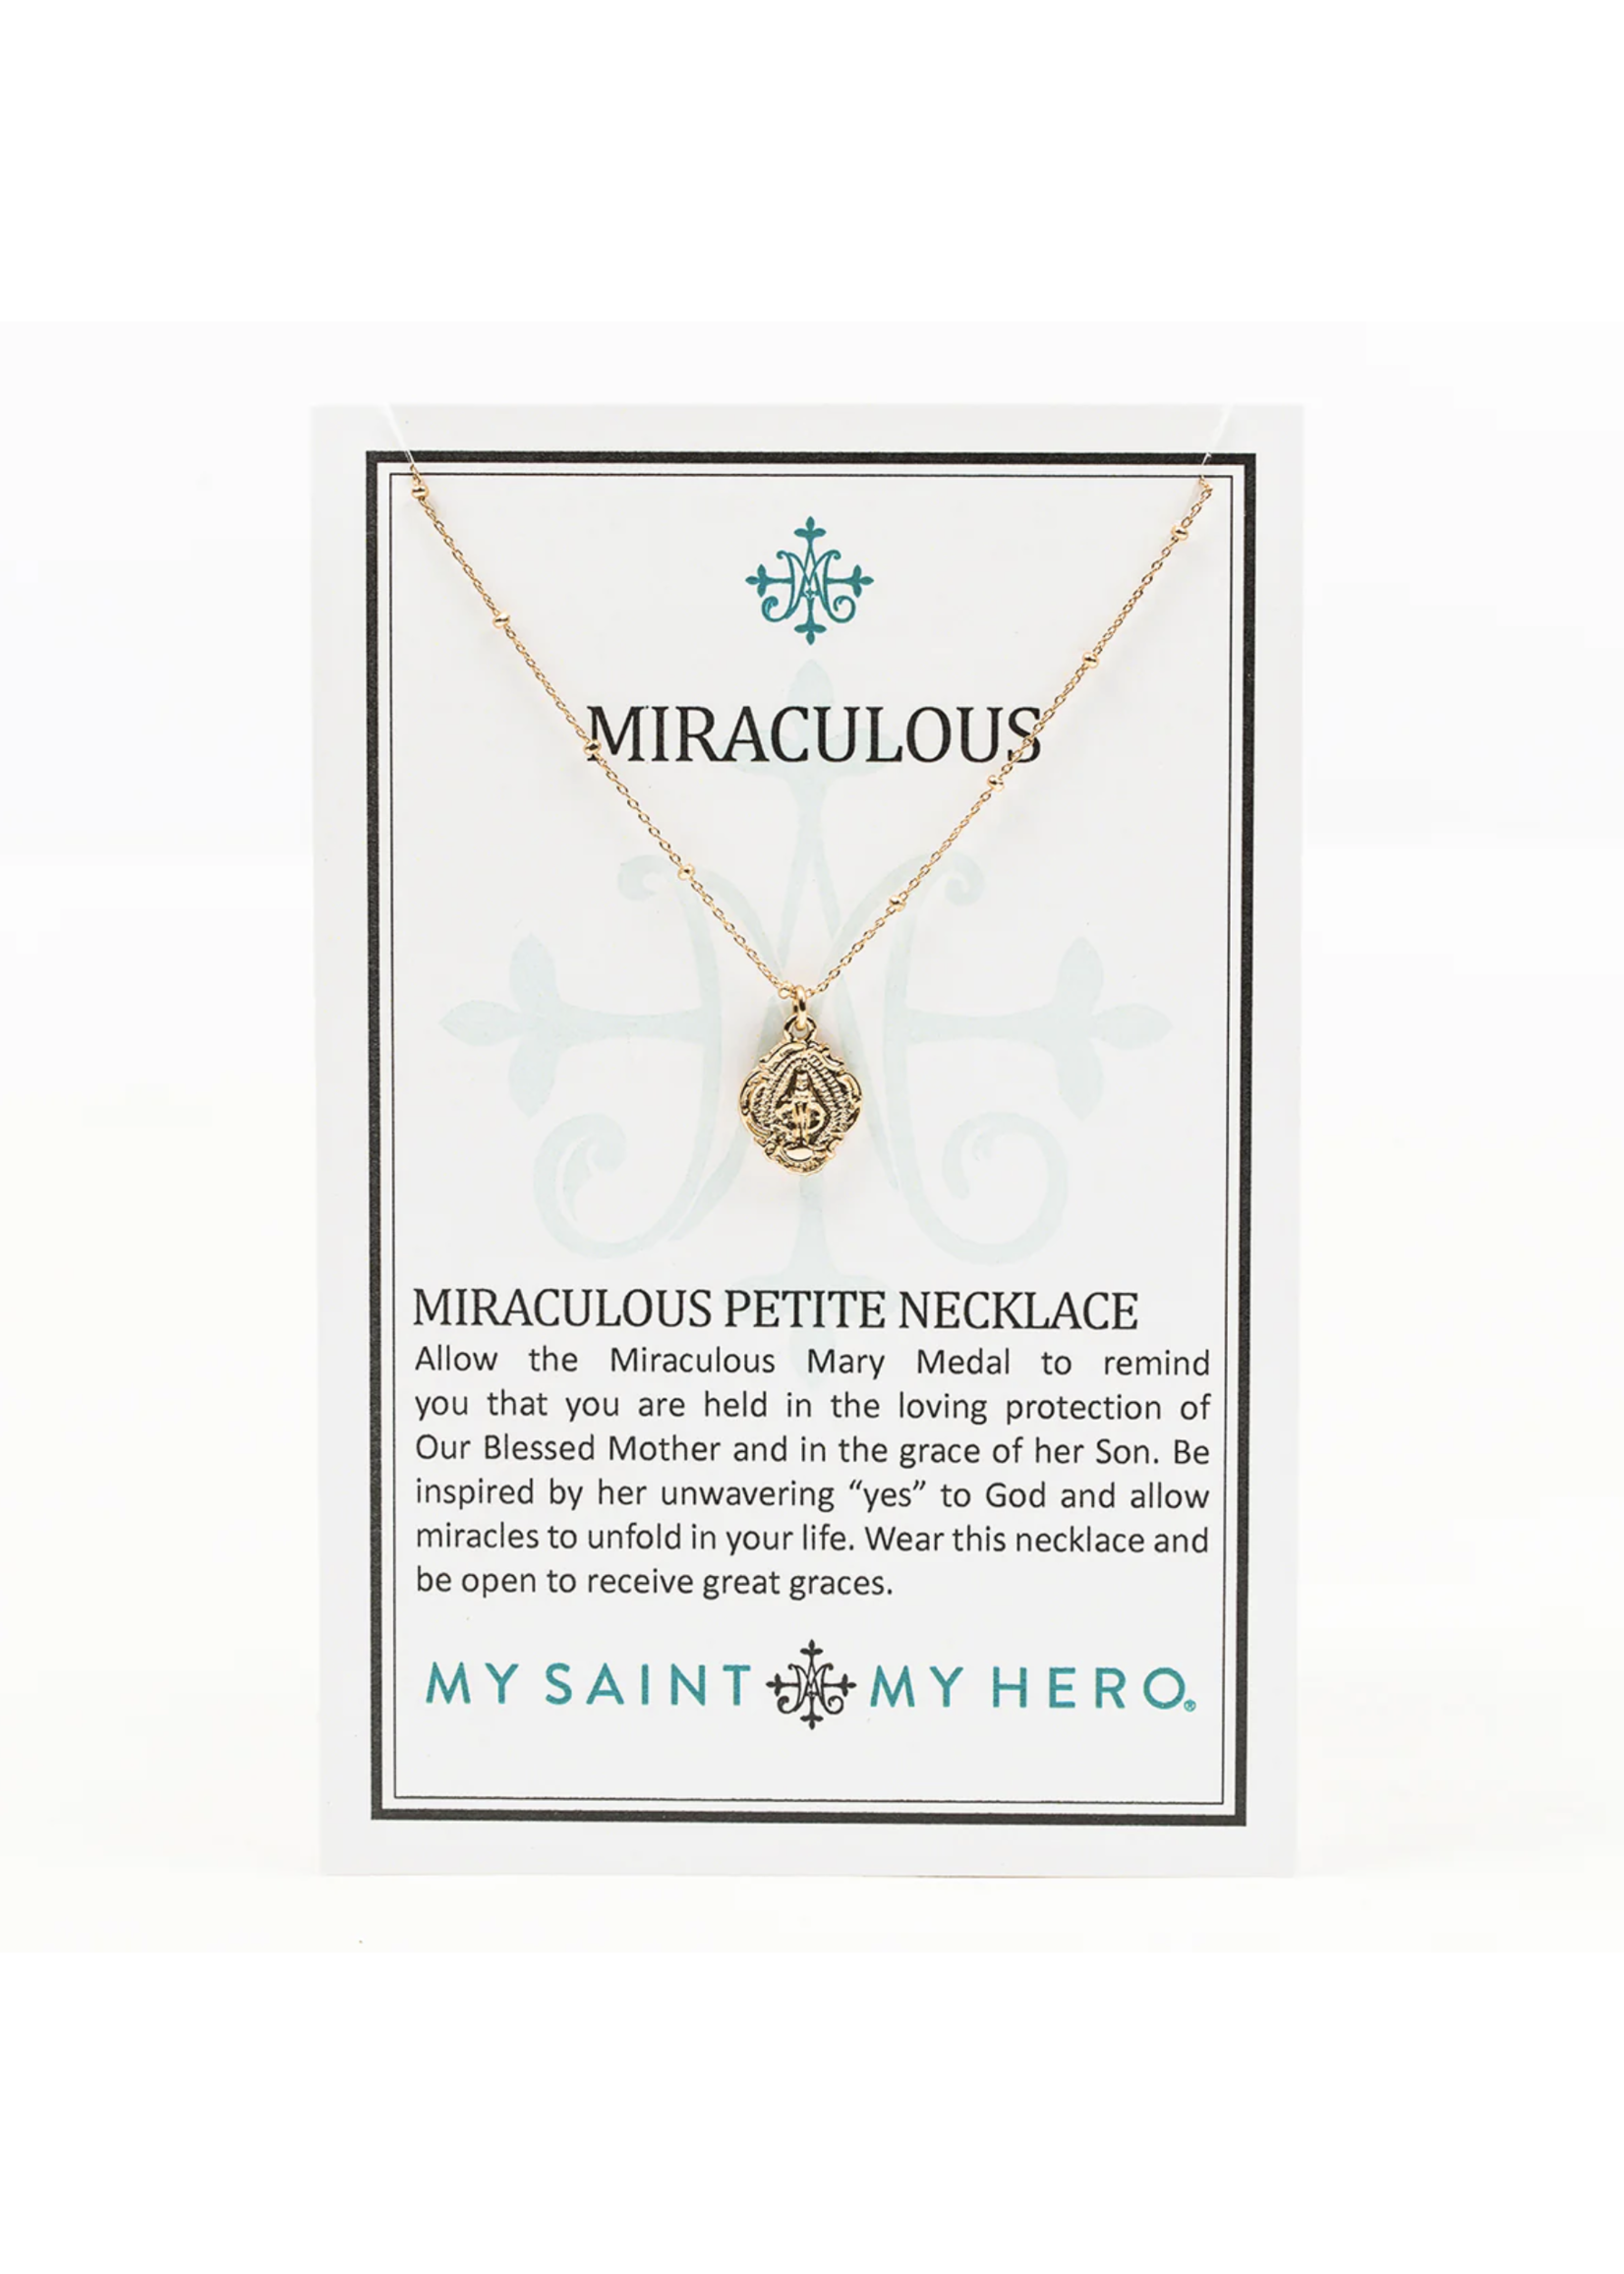 My Saint My Hero Miraculous Medal Petite Necklace - gold-tone